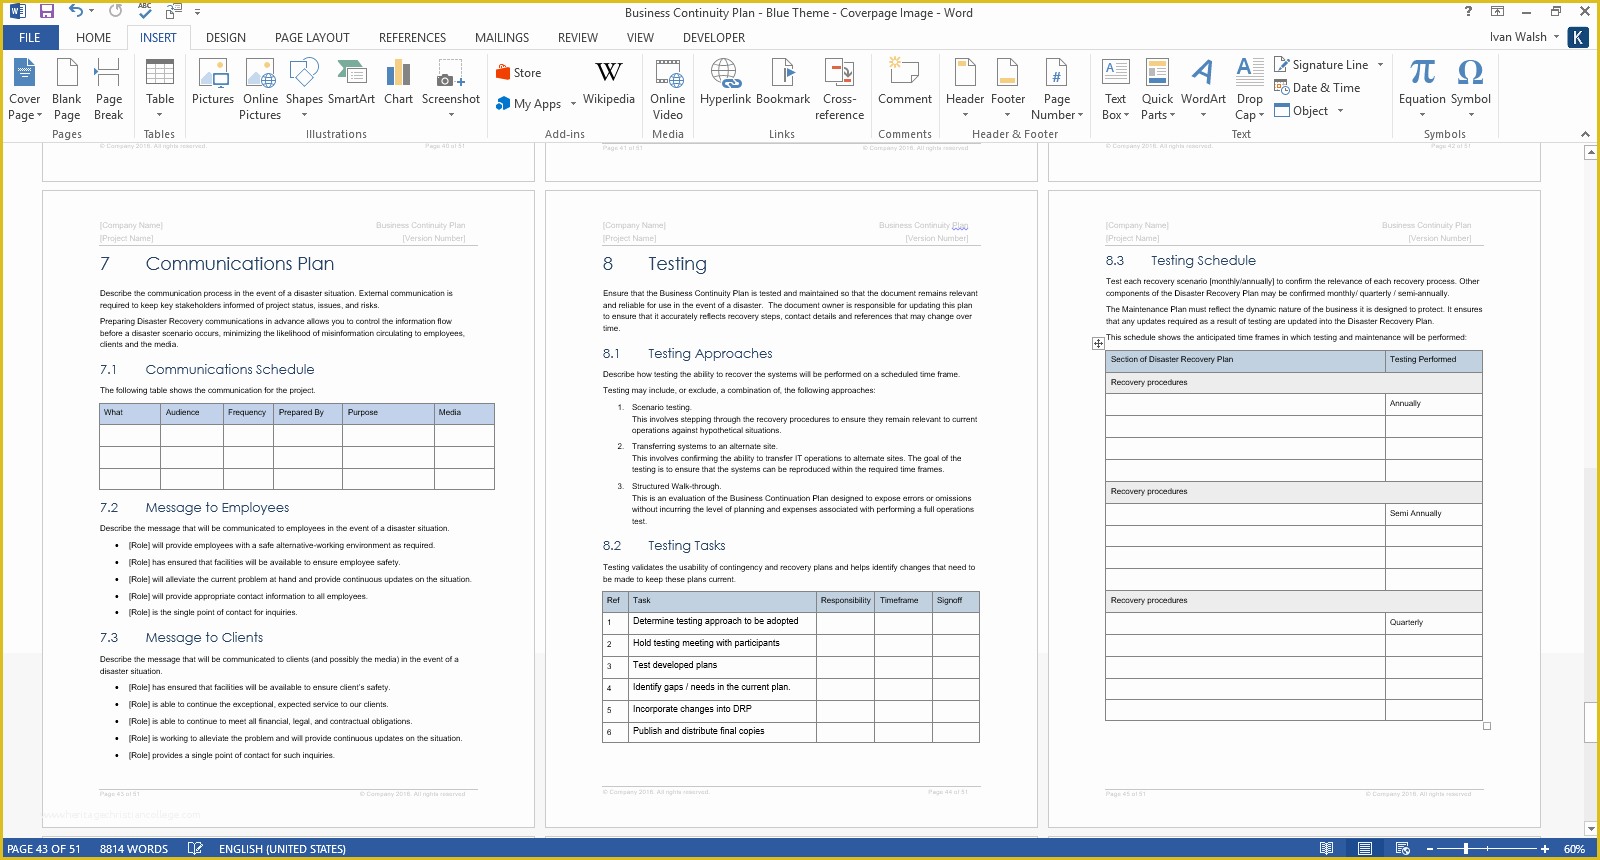 Free Contingency Plan Template Excel Of Business Continuity Plan – Download 48 Pg Ms Word & 12